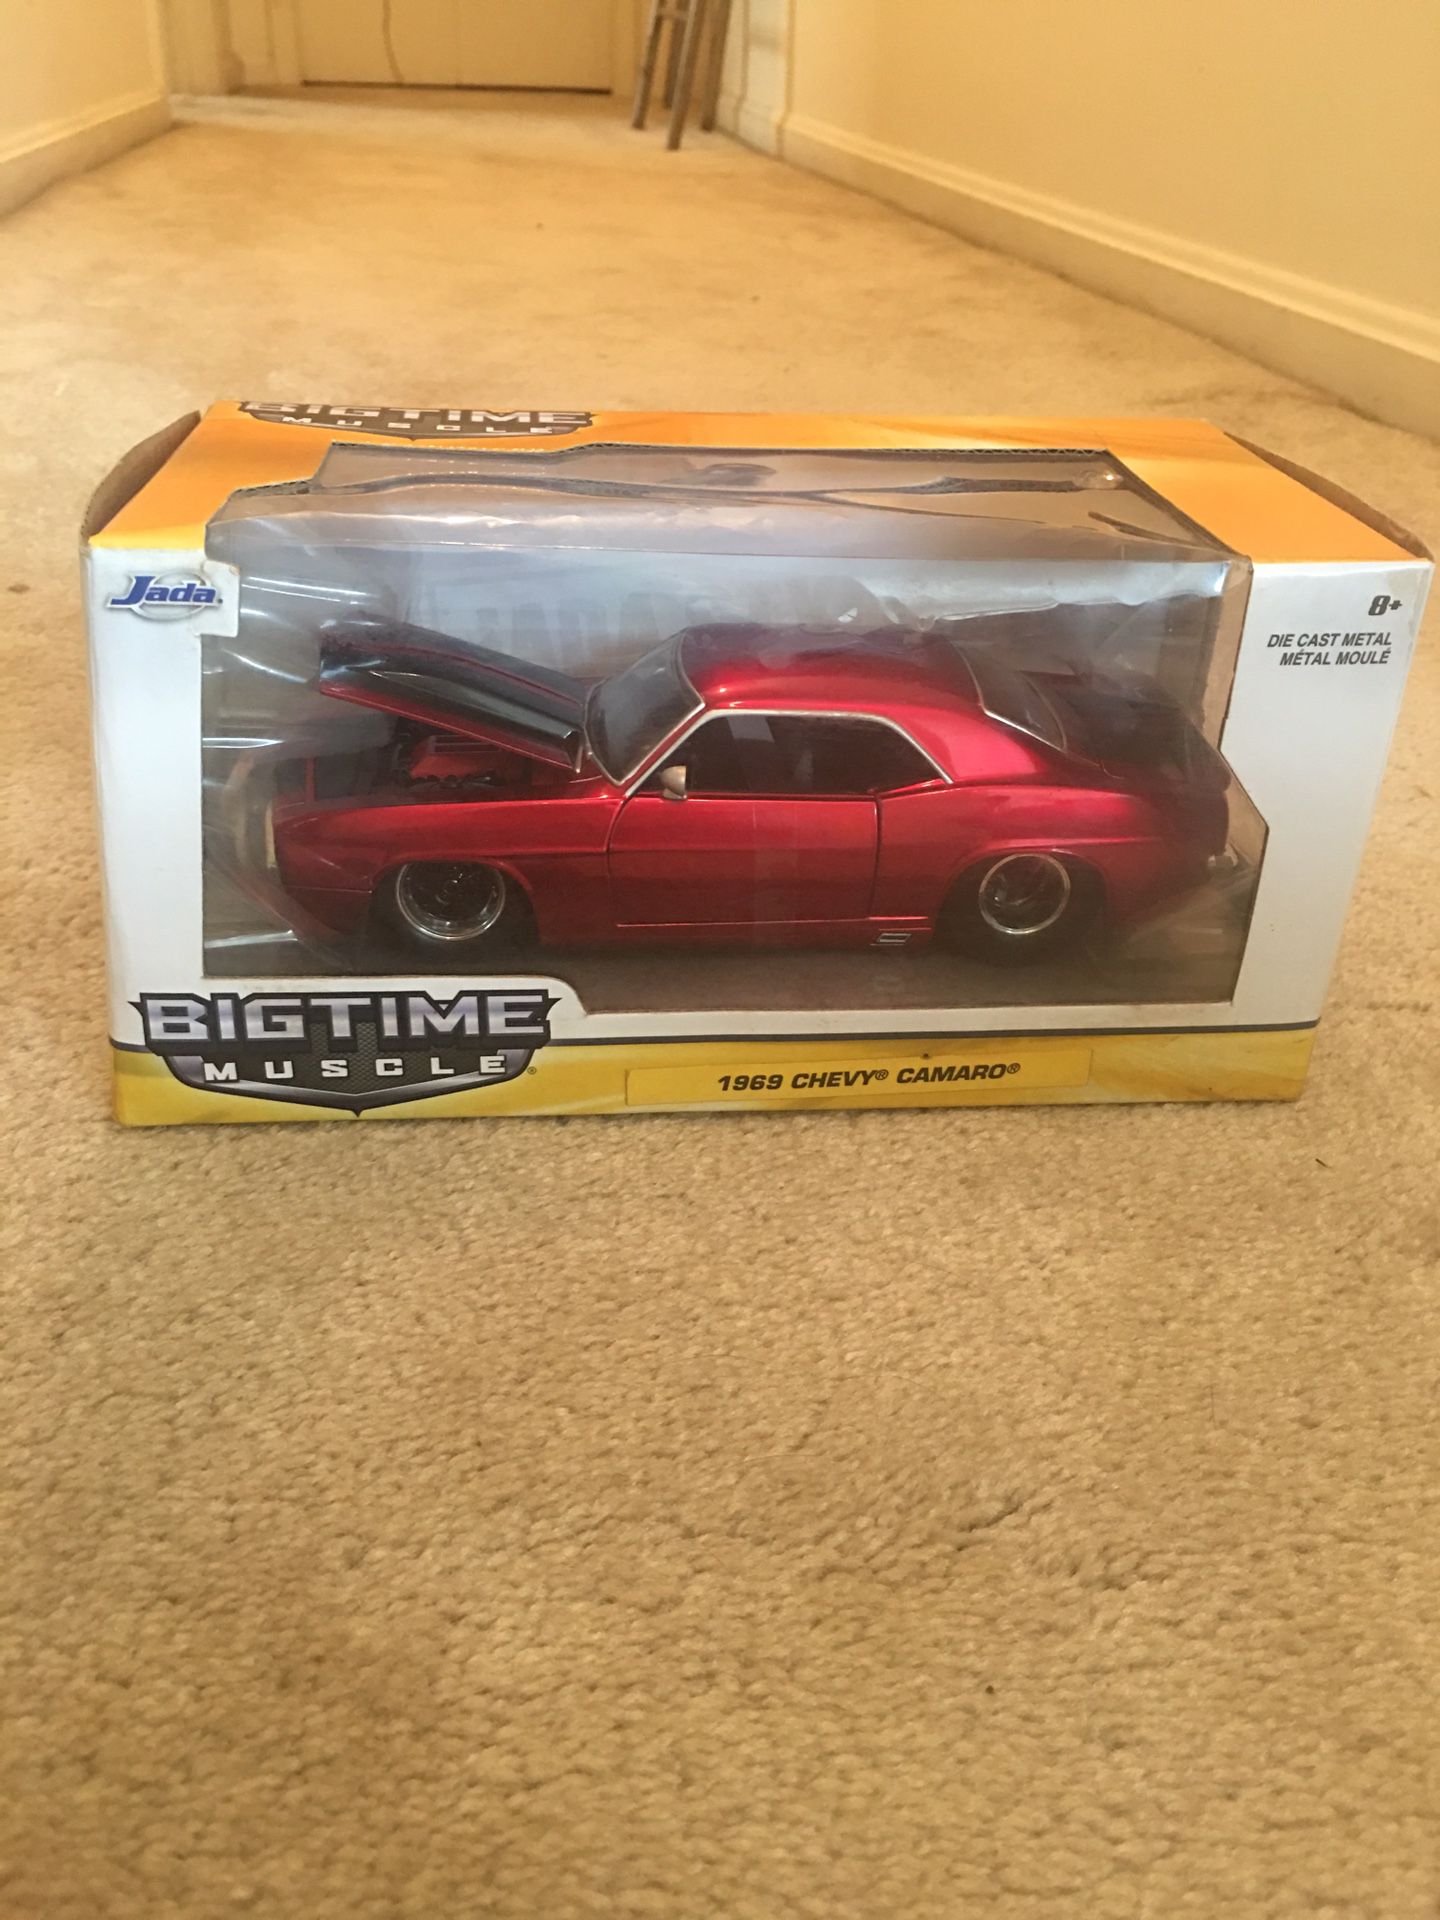 Big time muscle 1969 Chevy camaro model car